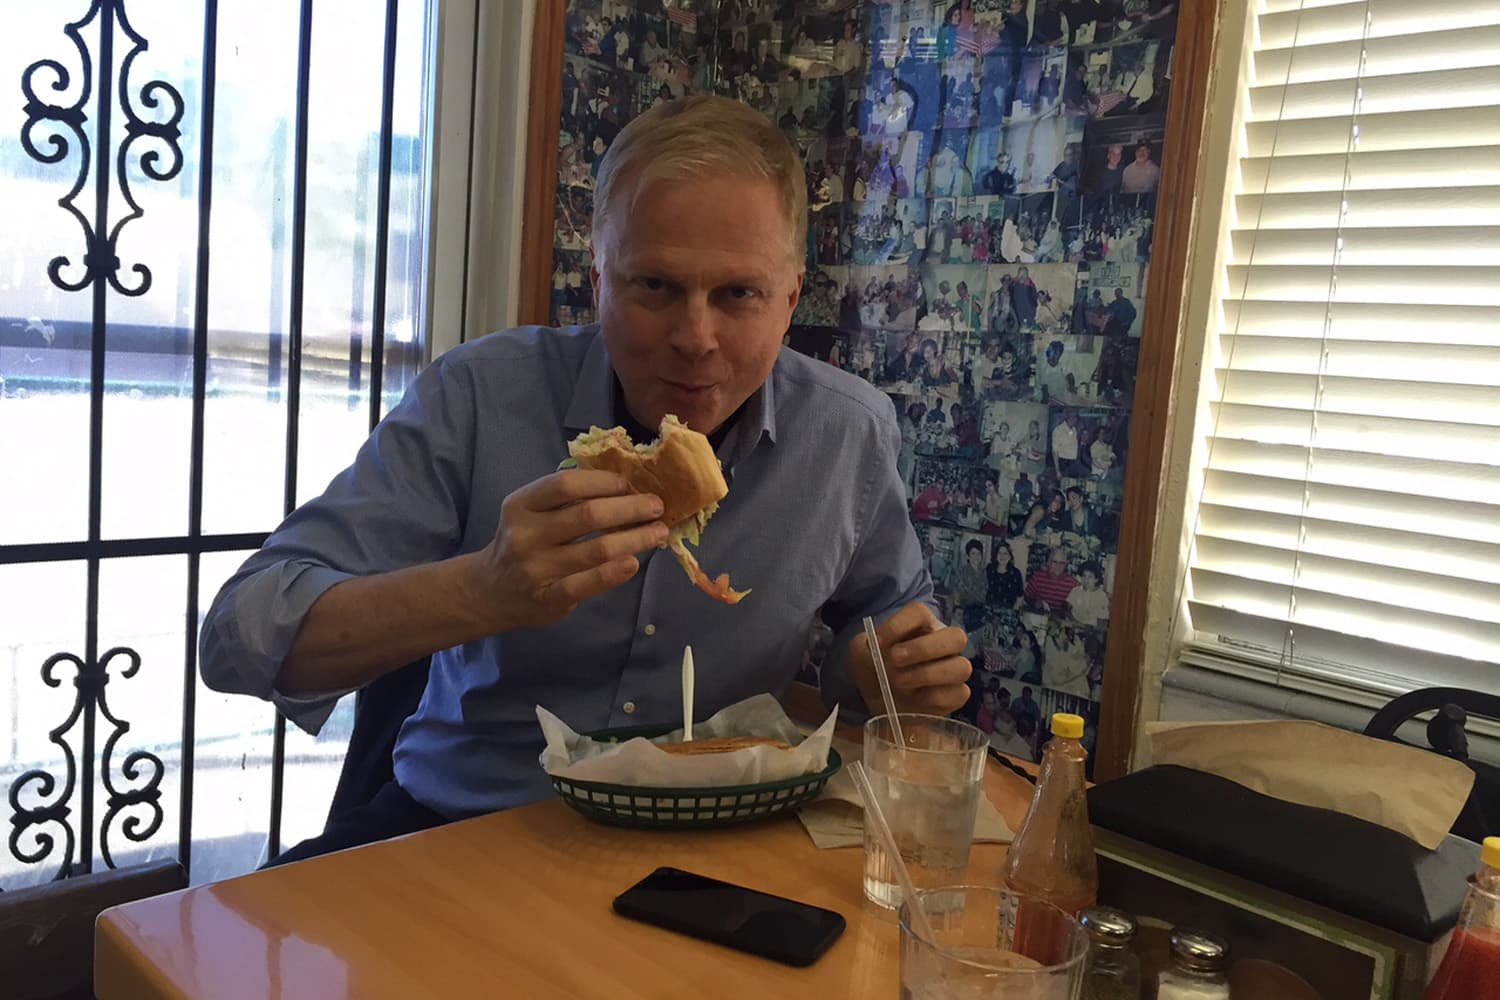 On Point host Tom Ashbrook enjoys a Cubano sandwich at the West Tampa Sandwich Shop during the On Point visit to Tampa, FL. (Eileen Imada/WBUR)